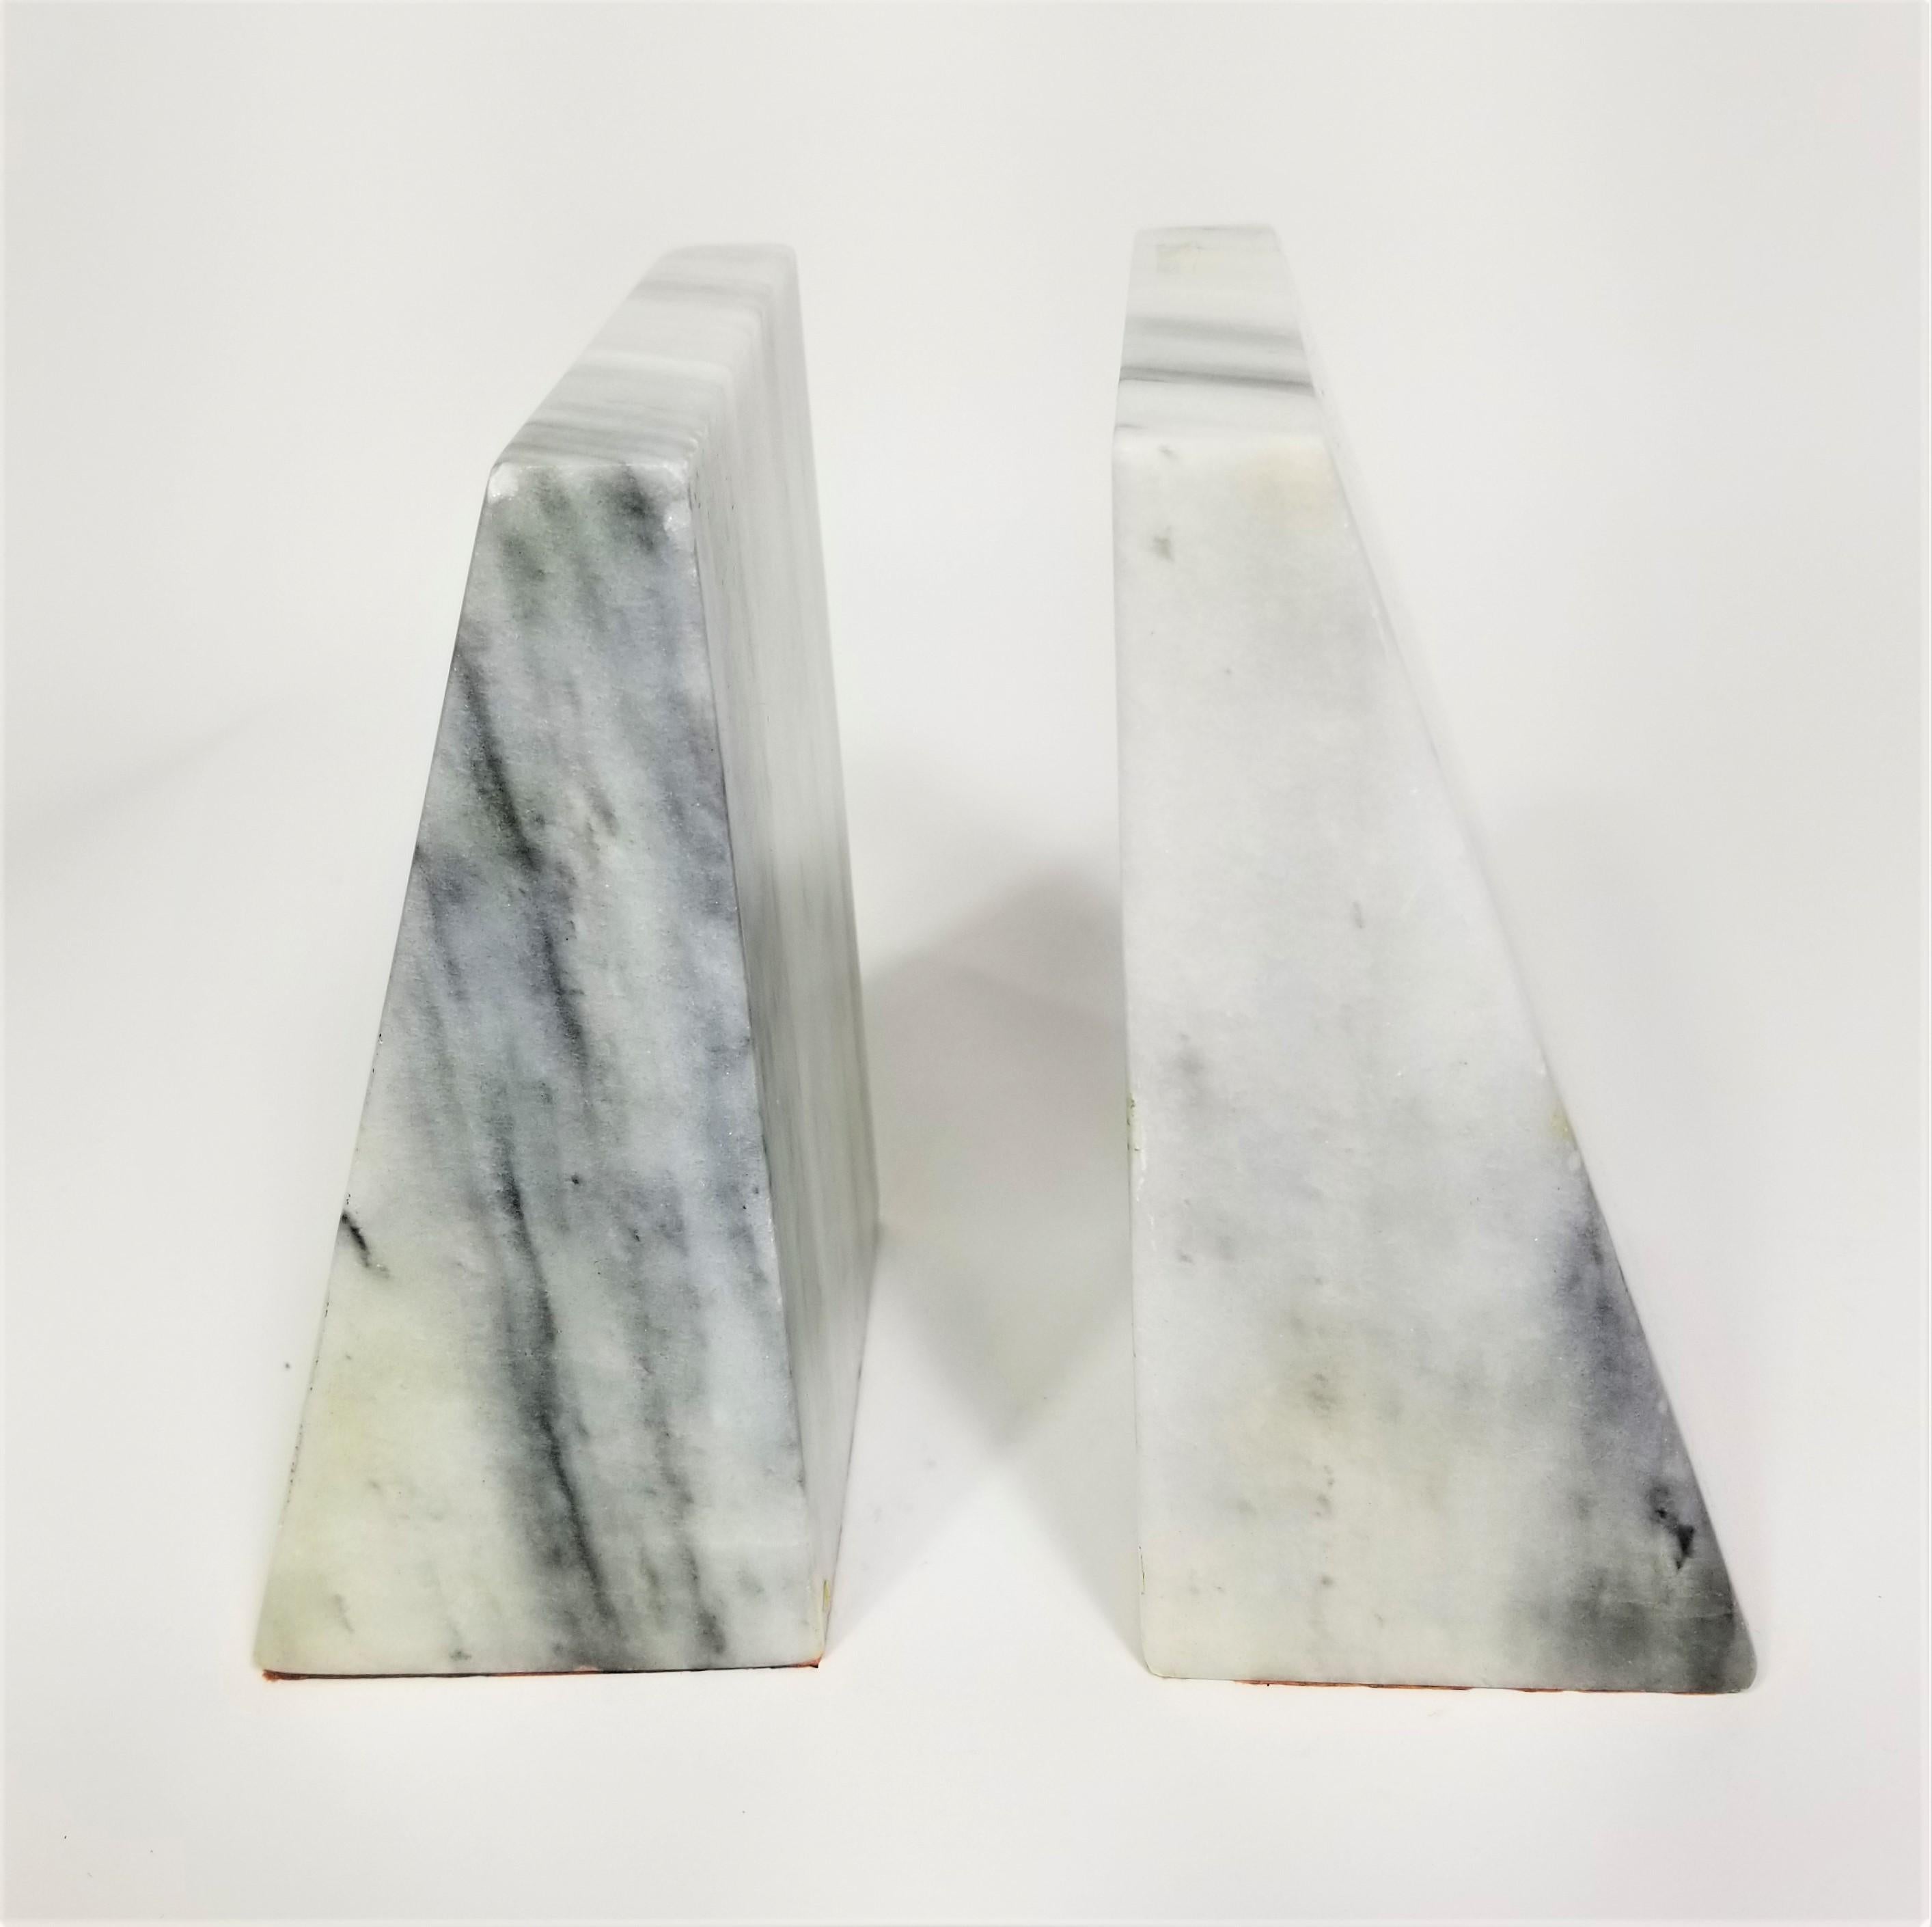 Greyslant marble bookends.